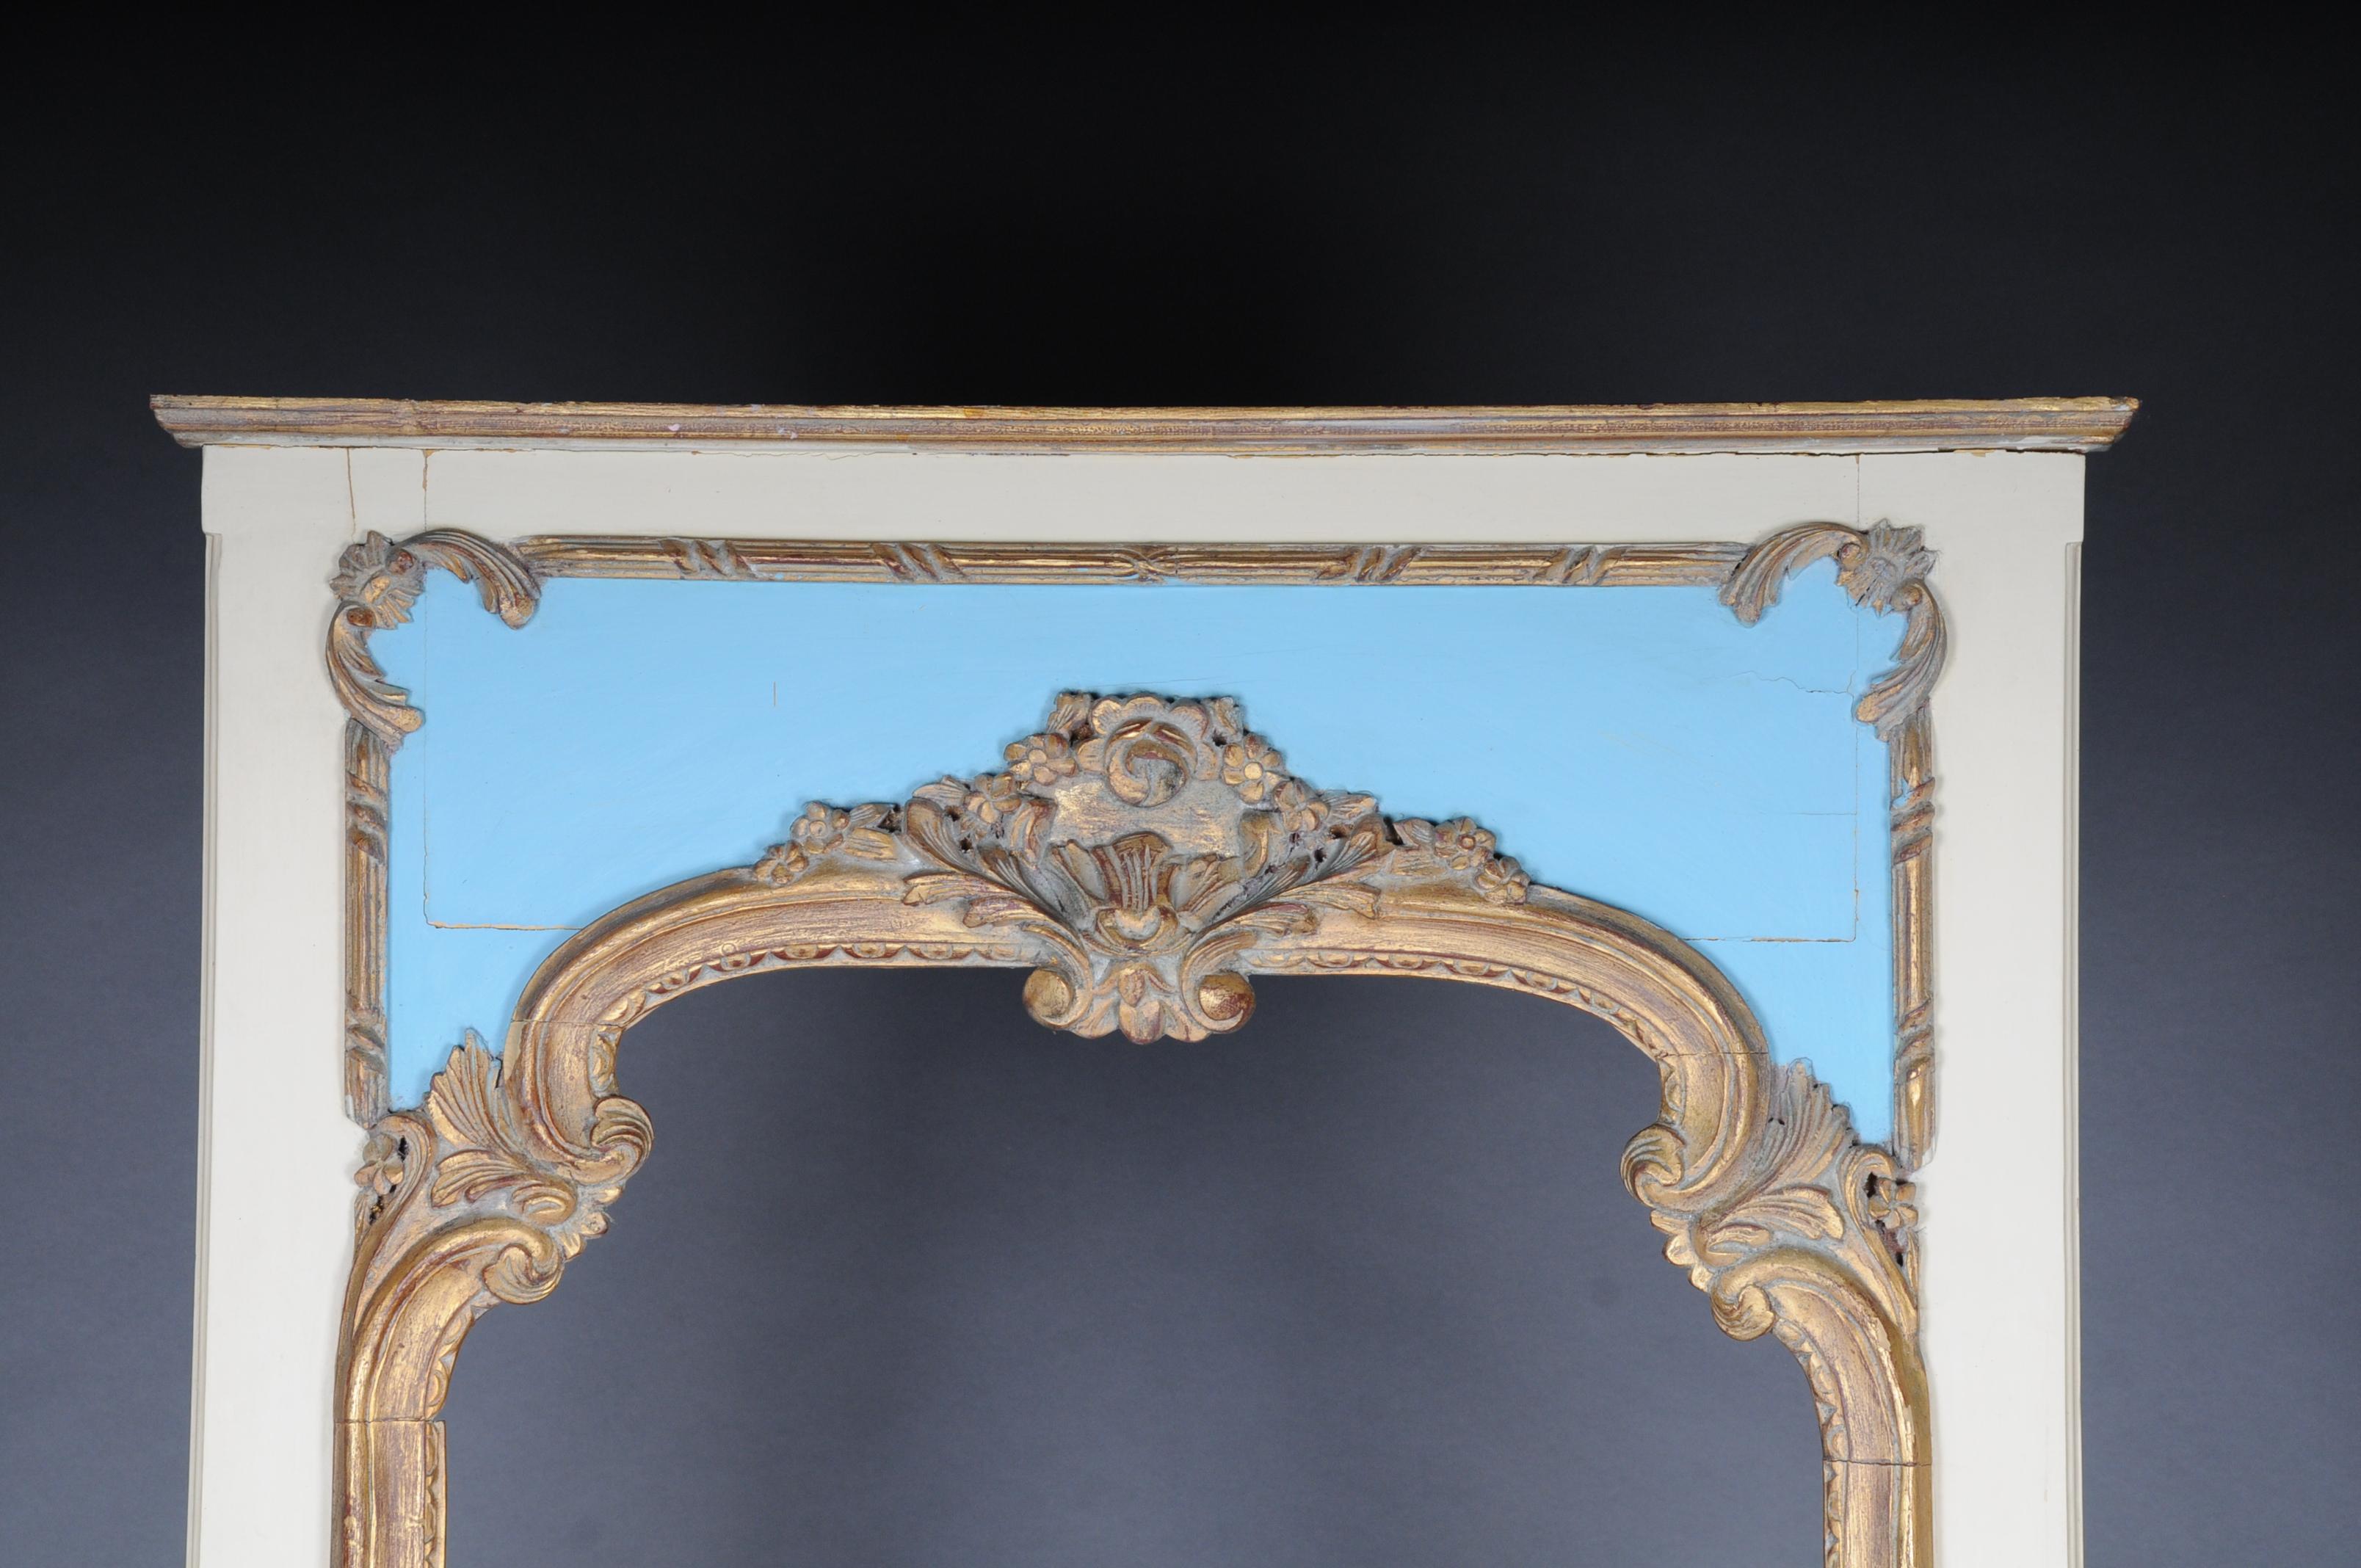 Solid wood, pastel colored and poliment gilt. Rectangular profiled mirror frame. Pediment with a plastic crown made of a medallion and plastic flowers. Centered mirror glass. Nice patina.

(M-Sai-6).